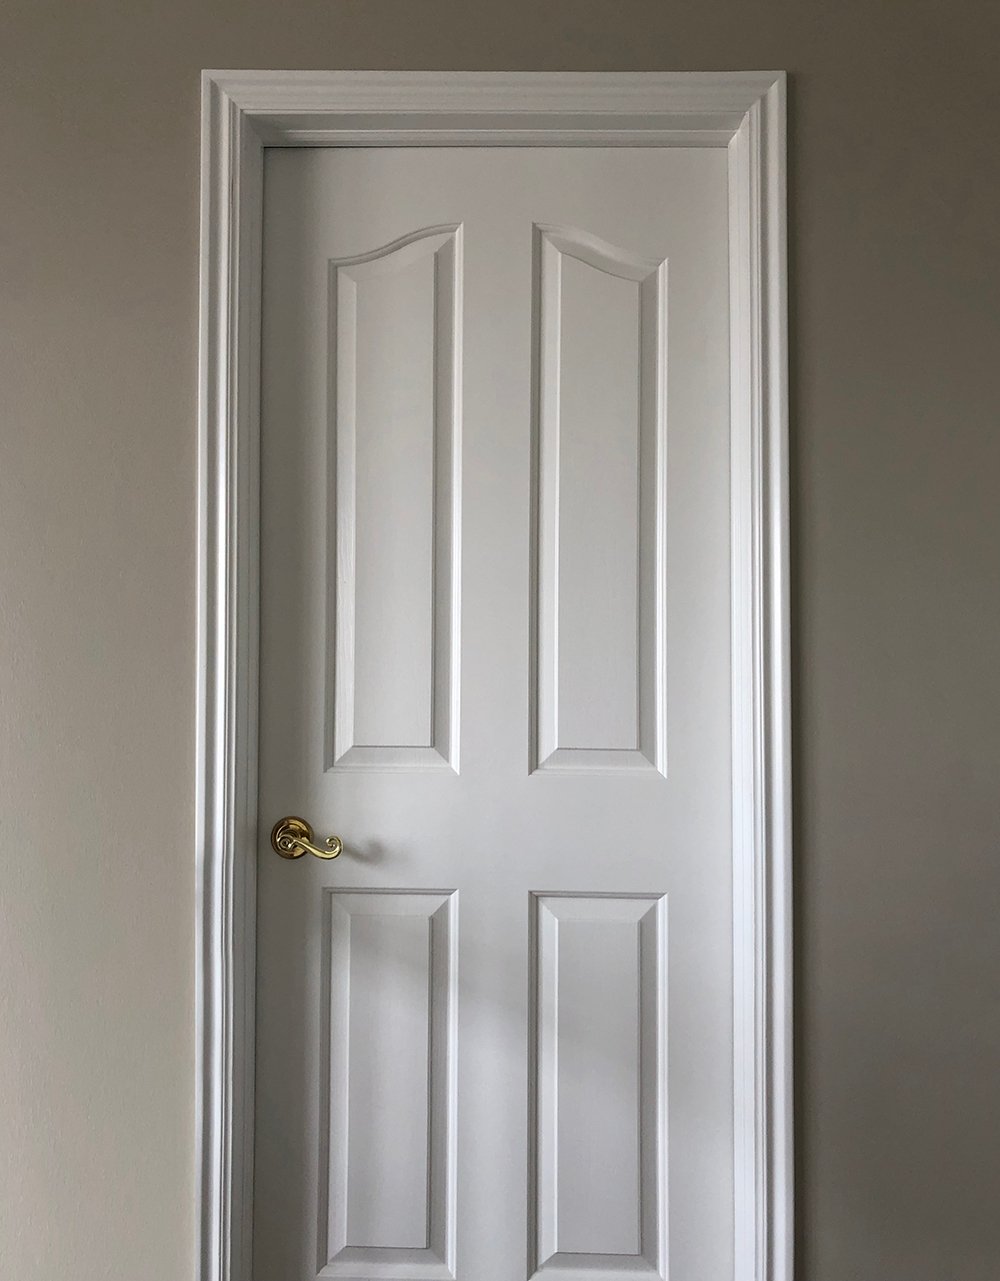 Selecting My Interior Doors & Hardware Style - roomfortuesday.com